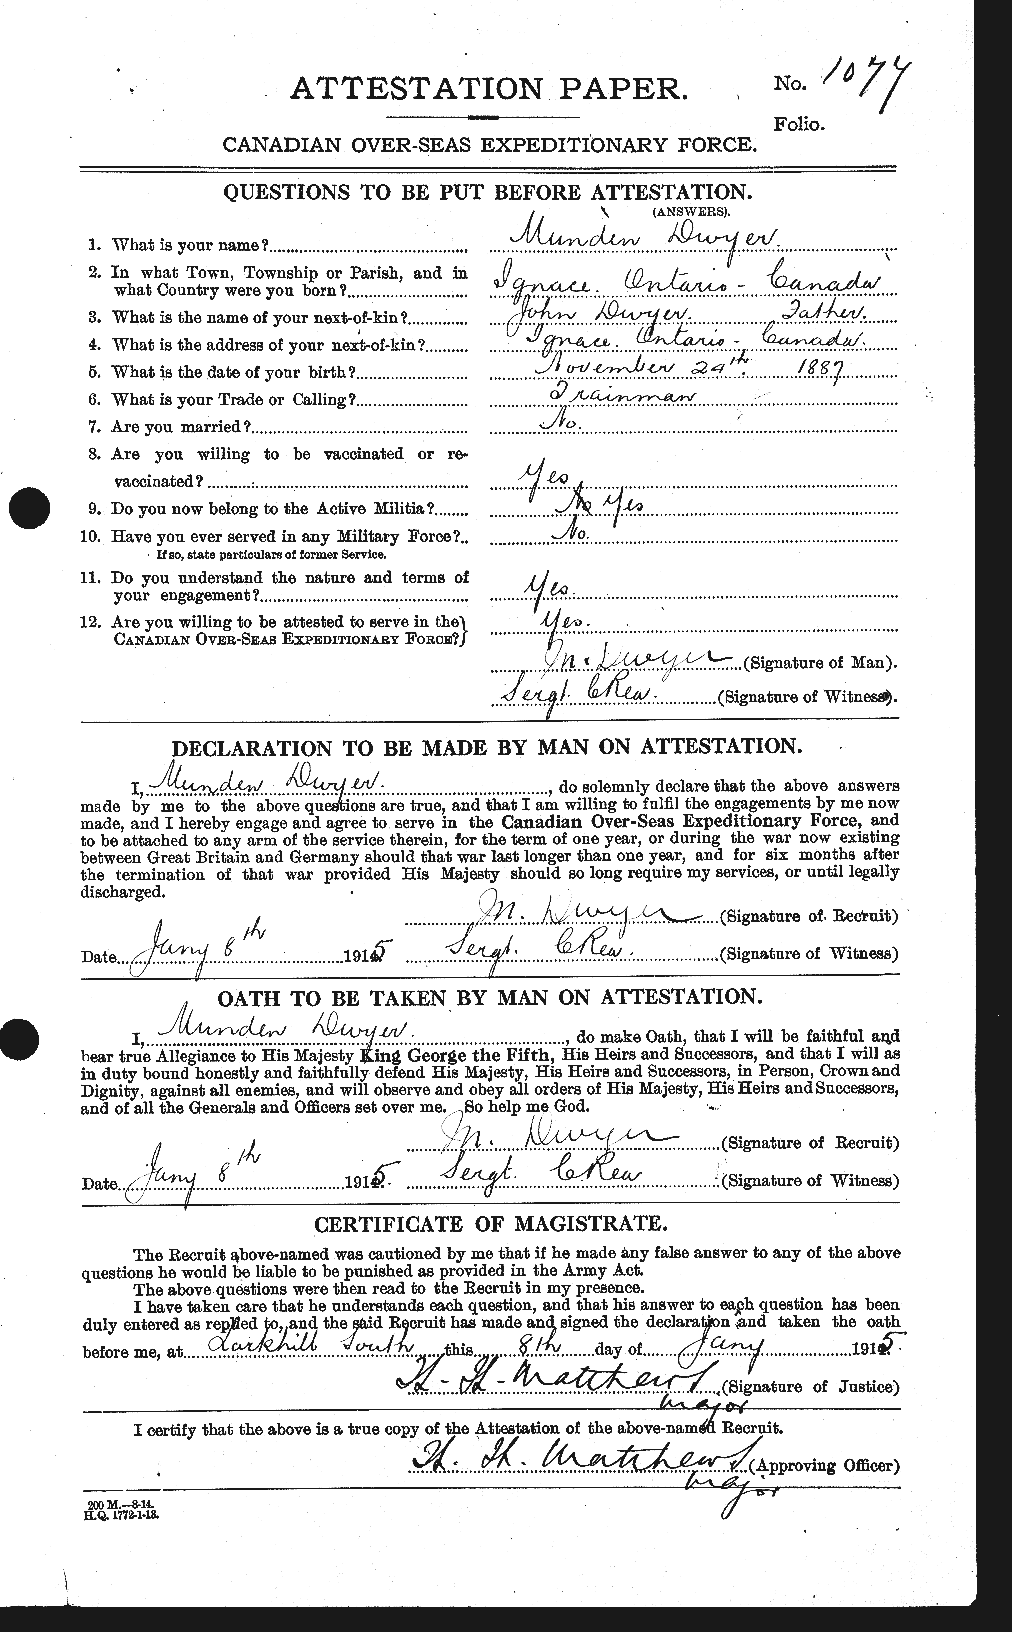 Personnel Records of the First World War - CEF 305674a